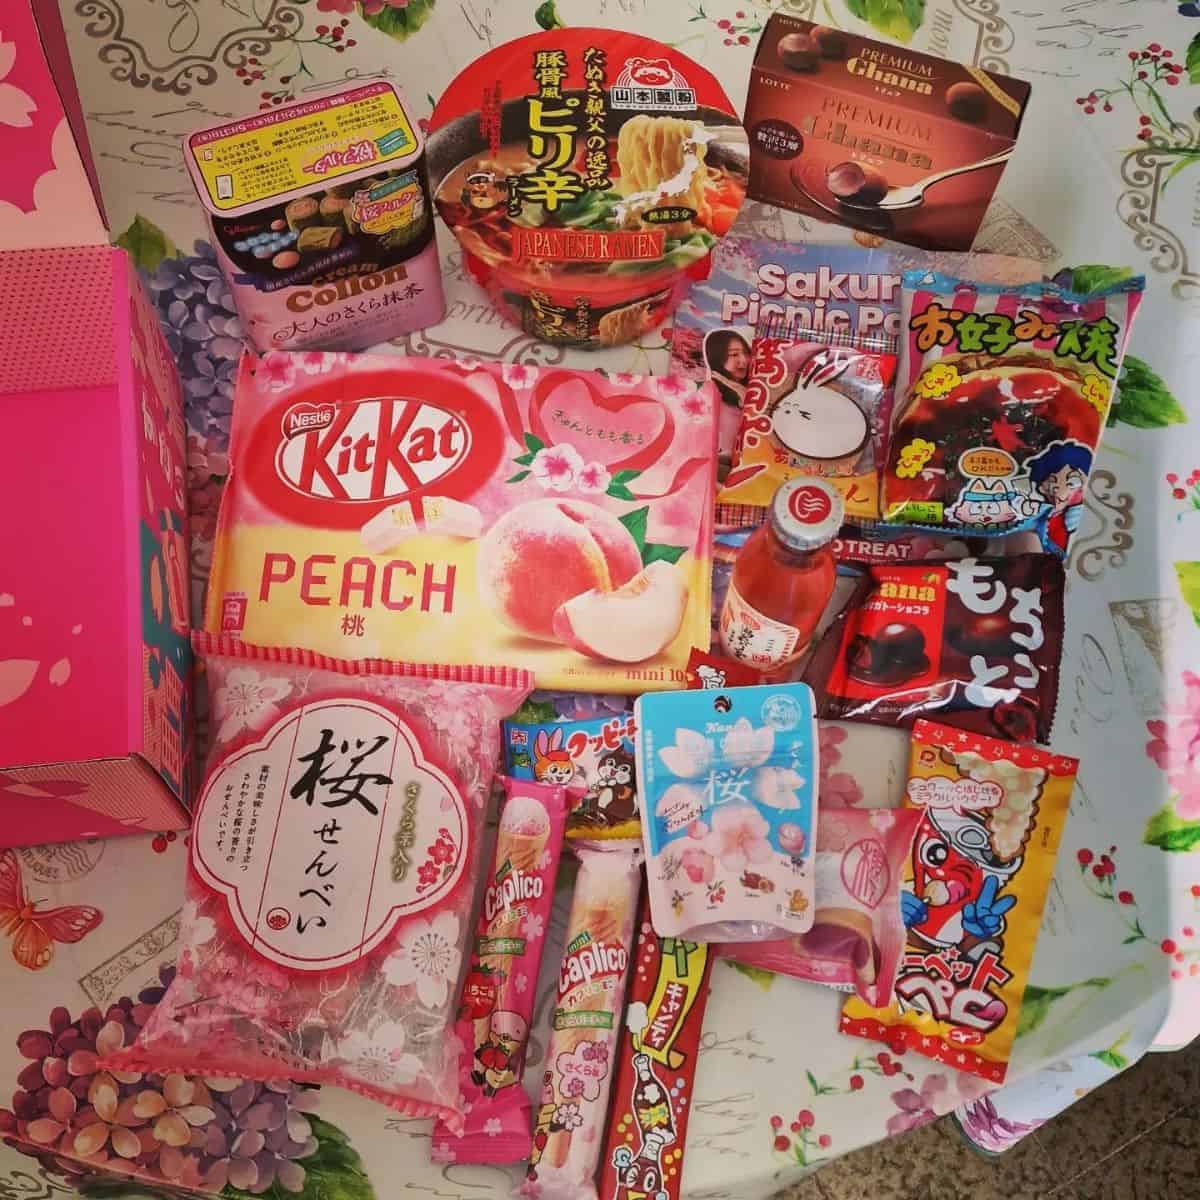 Several Japanese snacks laid on the table